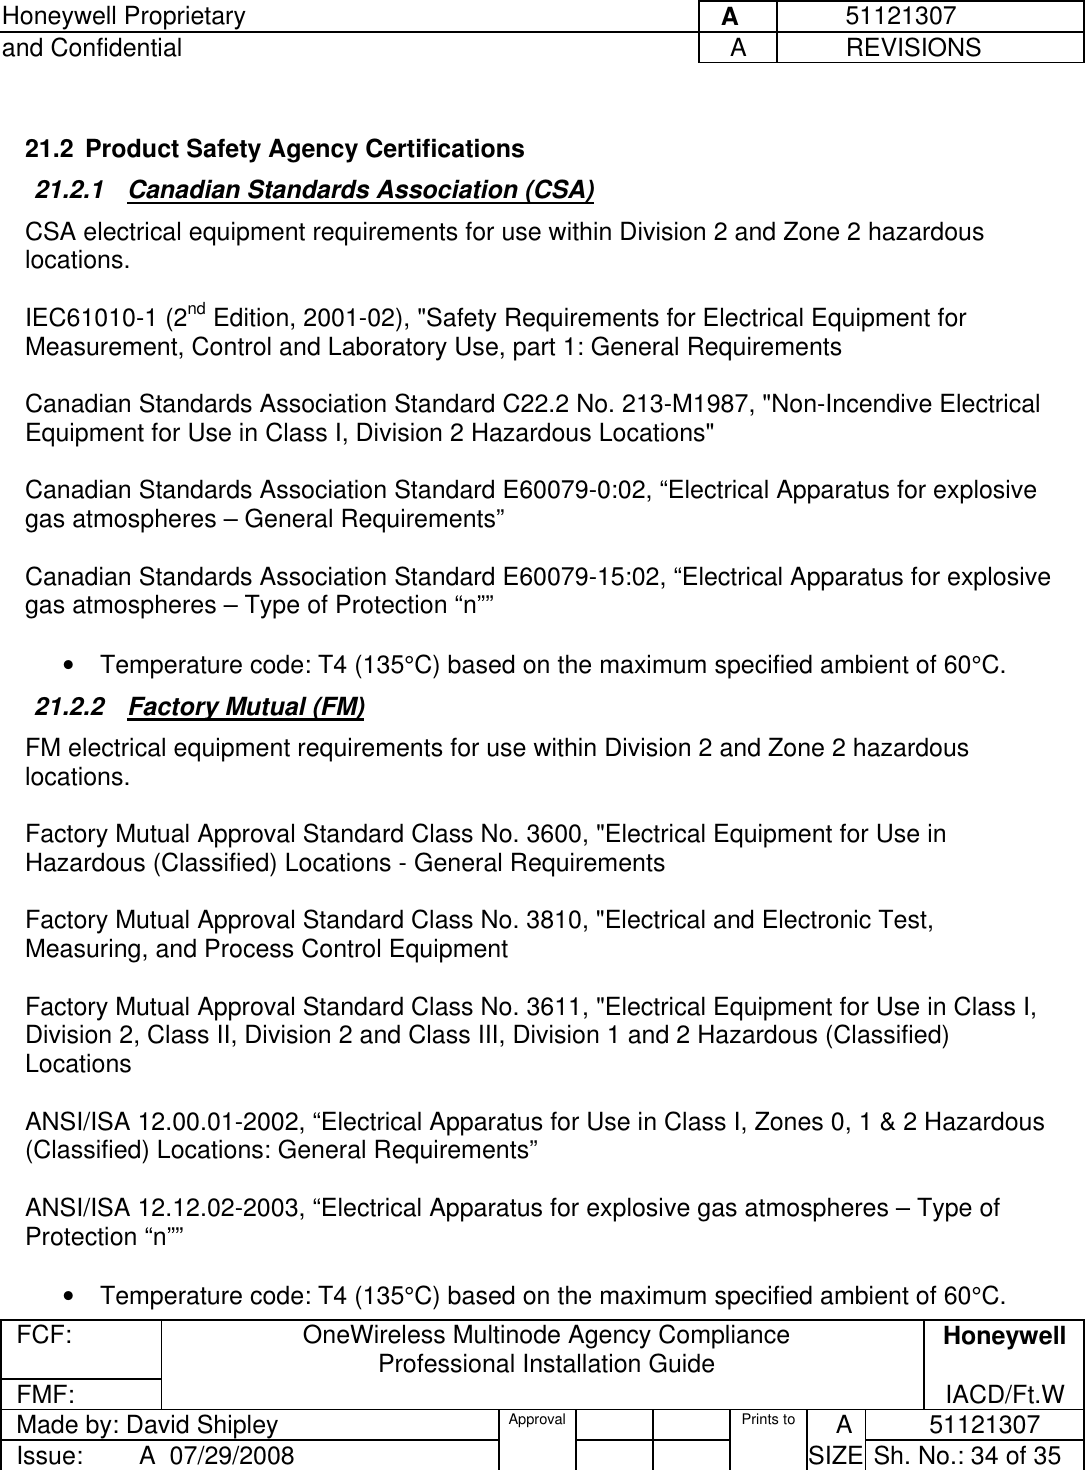 Honeywell Proprietary     A          51121307 and Confidential  A           REVISIONS  FCF:  OneWireless Multinode Agency Compliance Professional Installation Guide  Honeywell FMF:               IACD/Ft.W Made by: David Shipley  Approval   Prints to     A           51121307 Issue:        A  07/29/2008          SIZE  Sh. No.: 34 of 35   21.2  Product Safety Agency Certifications 21.2.1  Canadian Standards Association (CSA) CSA electrical equipment requirements for use within Division 2 and Zone 2 hazardous locations.  IEC61010-1 (2nd Edition, 2001-02), &quot;Safety Requirements for Electrical Equipment for Measurement, Control and Laboratory Use, part 1: General Requirements  Canadian Standards Association Standard C22.2 No. 213-M1987, &quot;Non-Incendive Electrical Equipment for Use in Class I, Division 2 Hazardous Locations&quot;  Canadian Standards Association Standard E60079-0:02, “Electrical Apparatus for explosive gas atmospheres – General Requirements”  Canadian Standards Association Standard E60079-15:02, “Electrical Apparatus for explosive gas atmospheres – Type of Protection “n””  •  Temperature code: T4 (135°C) based on the maximum specified ambient of 60°C. 21.2.2  Factory Mutual (FM) FM electrical equipment requirements for use within Division 2 and Zone 2 hazardous locations.  Factory Mutual Approval Standard Class No. 3600, &quot;Electrical Equipment for Use in Hazardous (Classified) Locations - General Requirements  Factory Mutual Approval Standard Class No. 3810, &quot;Electrical and Electronic Test, Measuring, and Process Control Equipment  Factory Mutual Approval Standard Class No. 3611, &quot;Electrical Equipment for Use in Class I, Division 2, Class II, Division 2 and Class III, Division 1 and 2 Hazardous (Classified) Locations   ANSI/ISA 12.00.01-2002, “Electrical Apparatus for Use in Class I, Zones 0, 1 &amp; 2 Hazardous (Classified) Locations: General Requirements”  ANSI/ISA 12.12.02-2003, “Electrical Apparatus for explosive gas atmospheres – Type of Protection “n””  •  Temperature code: T4 (135°C) based on the maximum specified ambient of 60°C. 